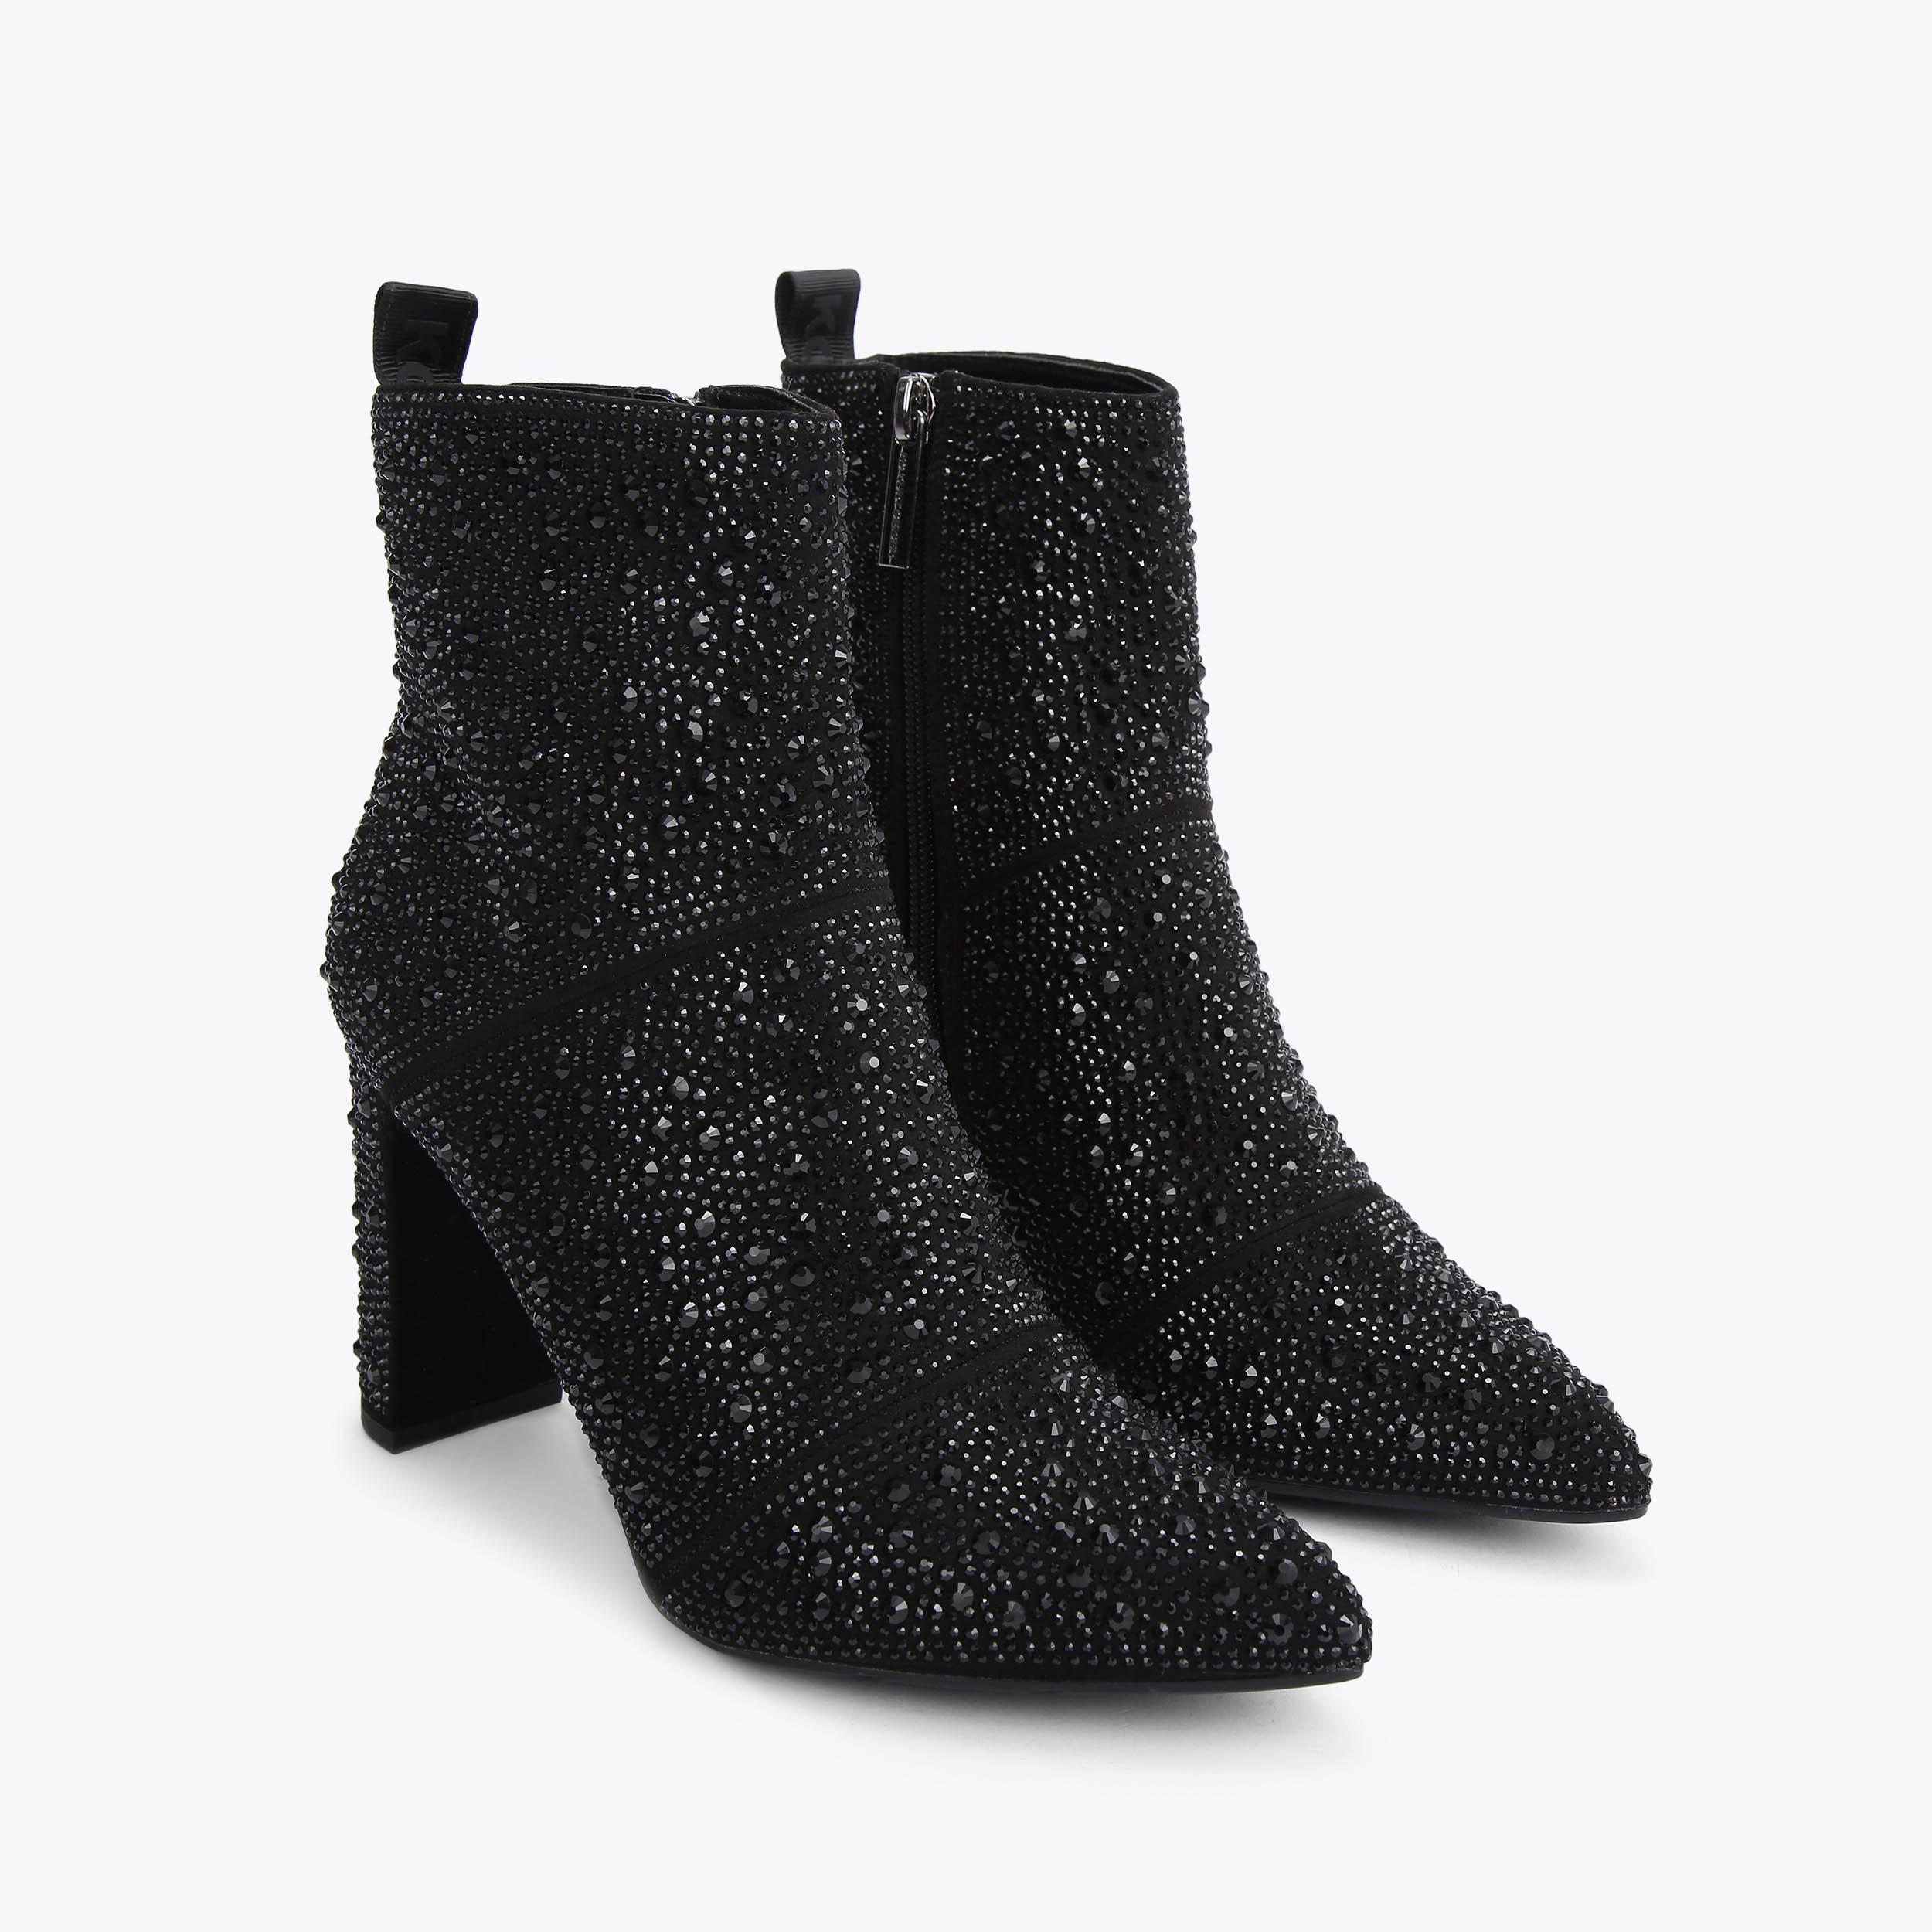 SURI BLING Black Jewelled Pointed Toe Ankle Boots by KG KURT GEIGER